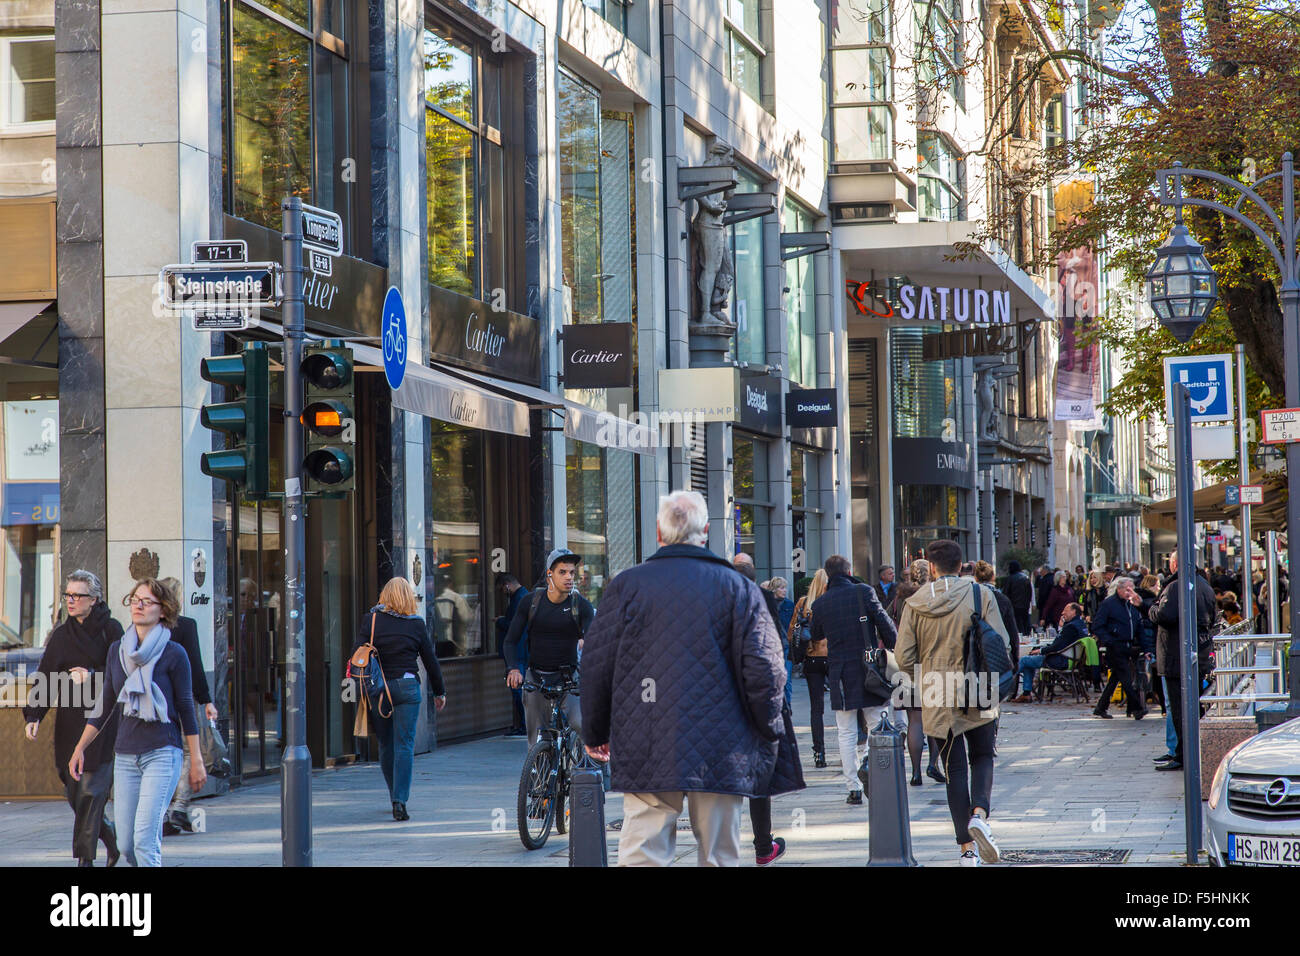 Königsallee, called Kö, noble central shopping street with many expensive  brand stores and shops, Düsseldorf, Germany Stock Photo - Alamy